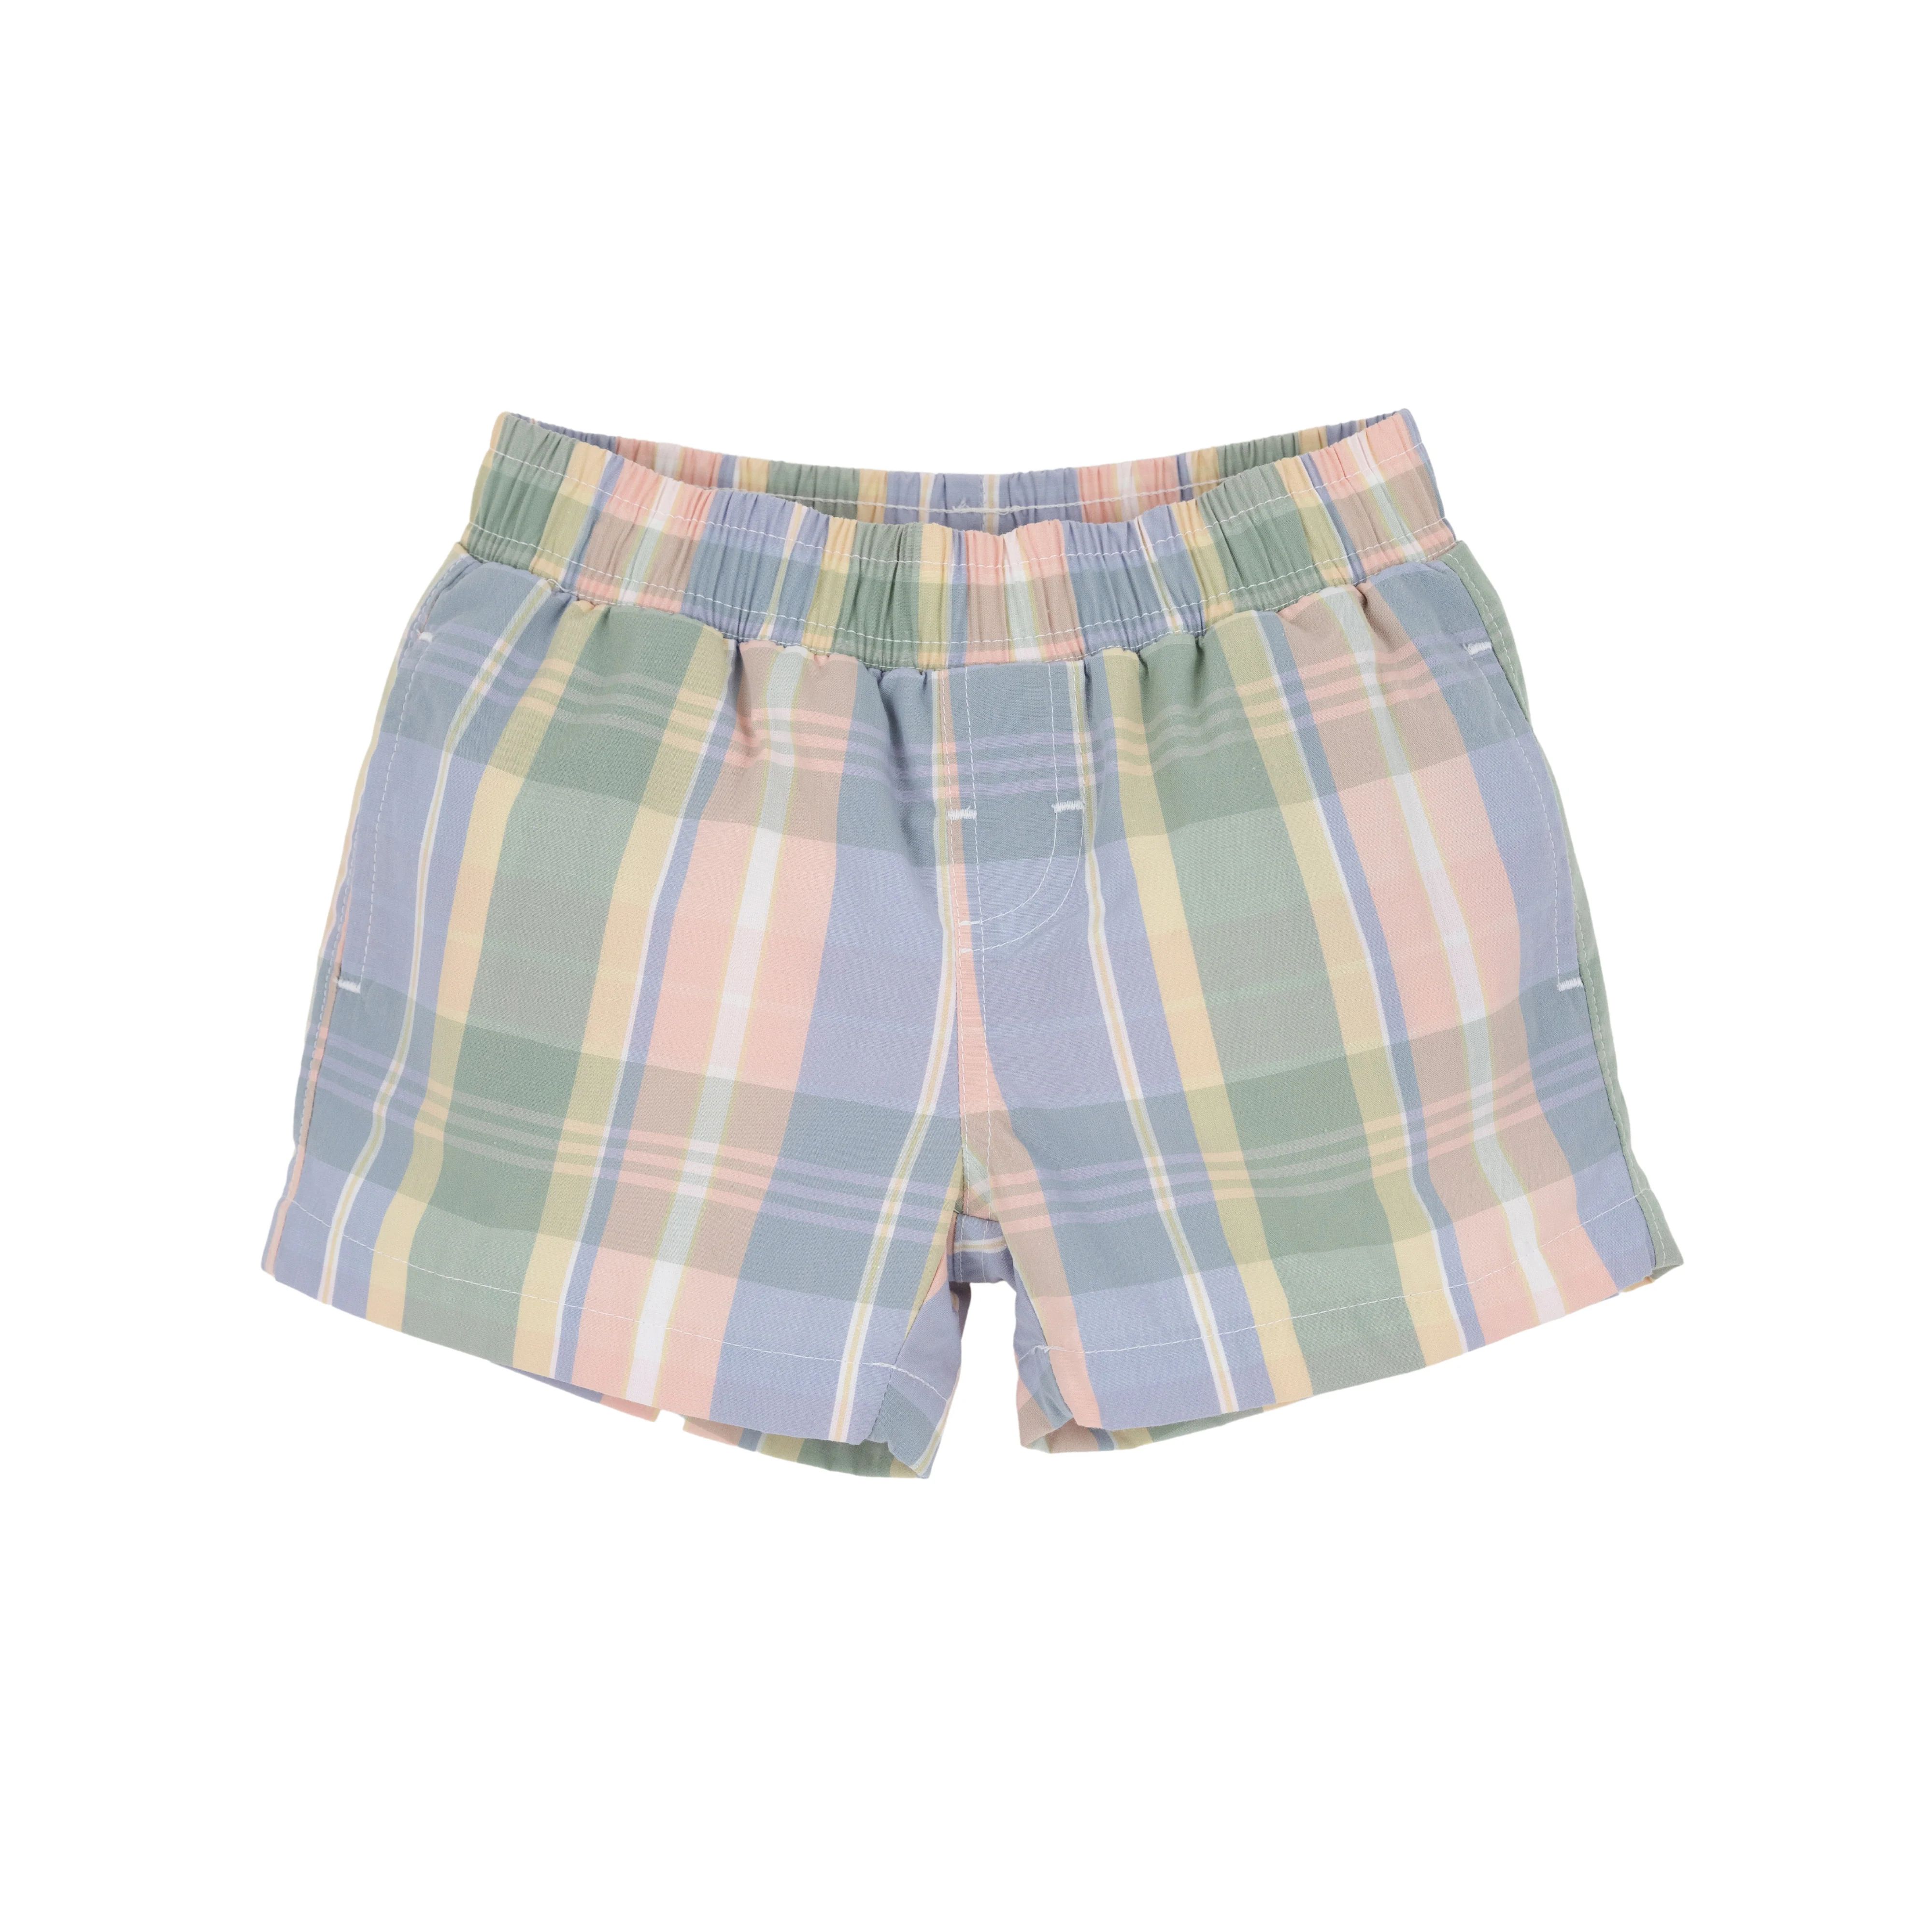 Sheffield Shorts - Osprey Point Plaid with Worth Avenue White Stork | The Beaufort Bonnet Company